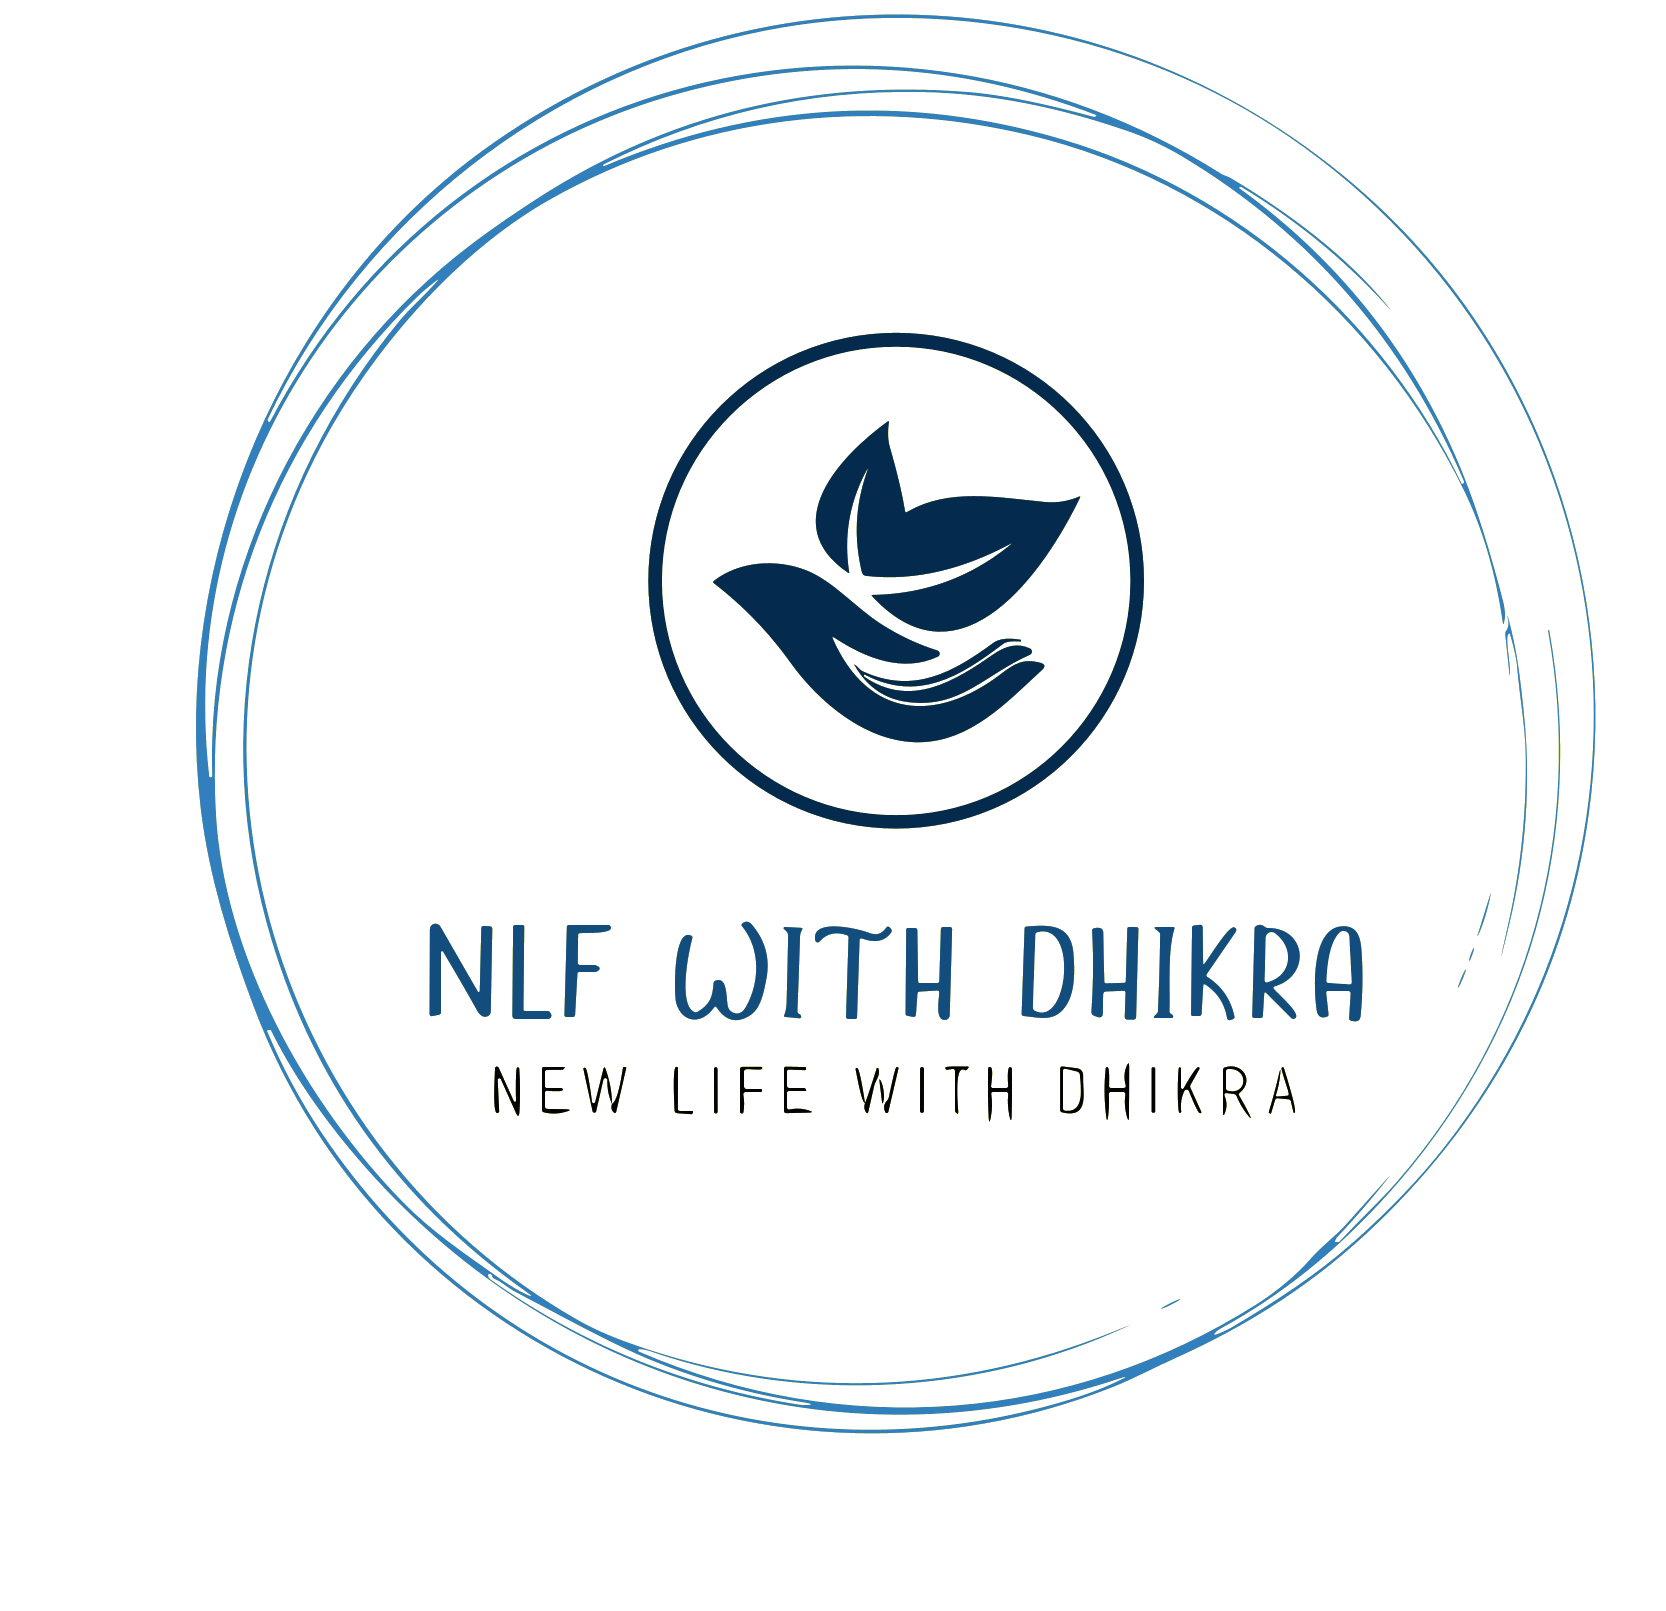 NEW LIFE WITH DHIKRA